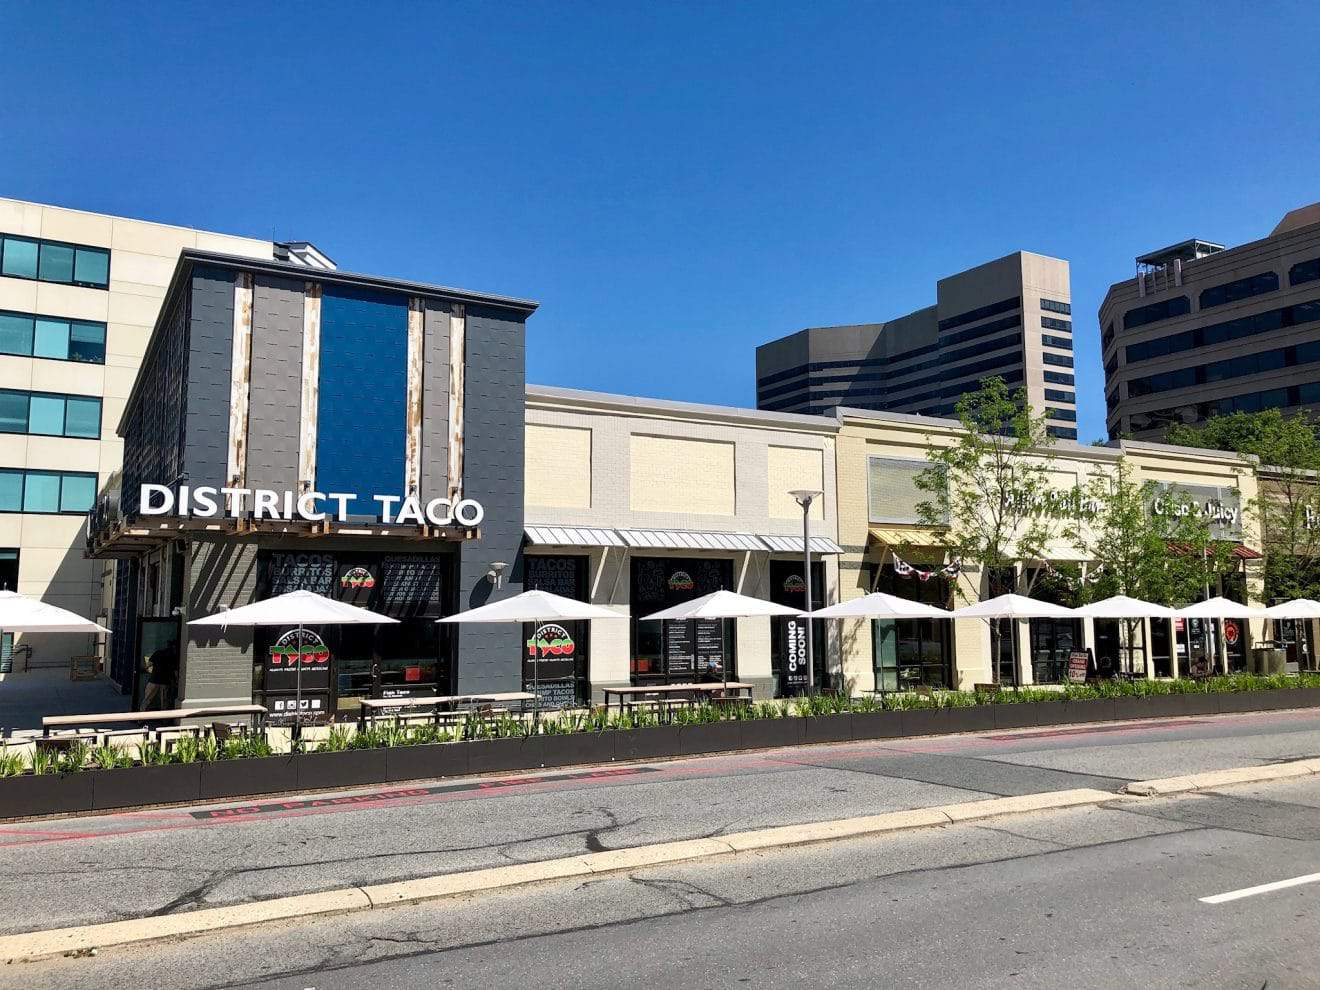 District Taco: “We’re Getting Very Close” to Opening